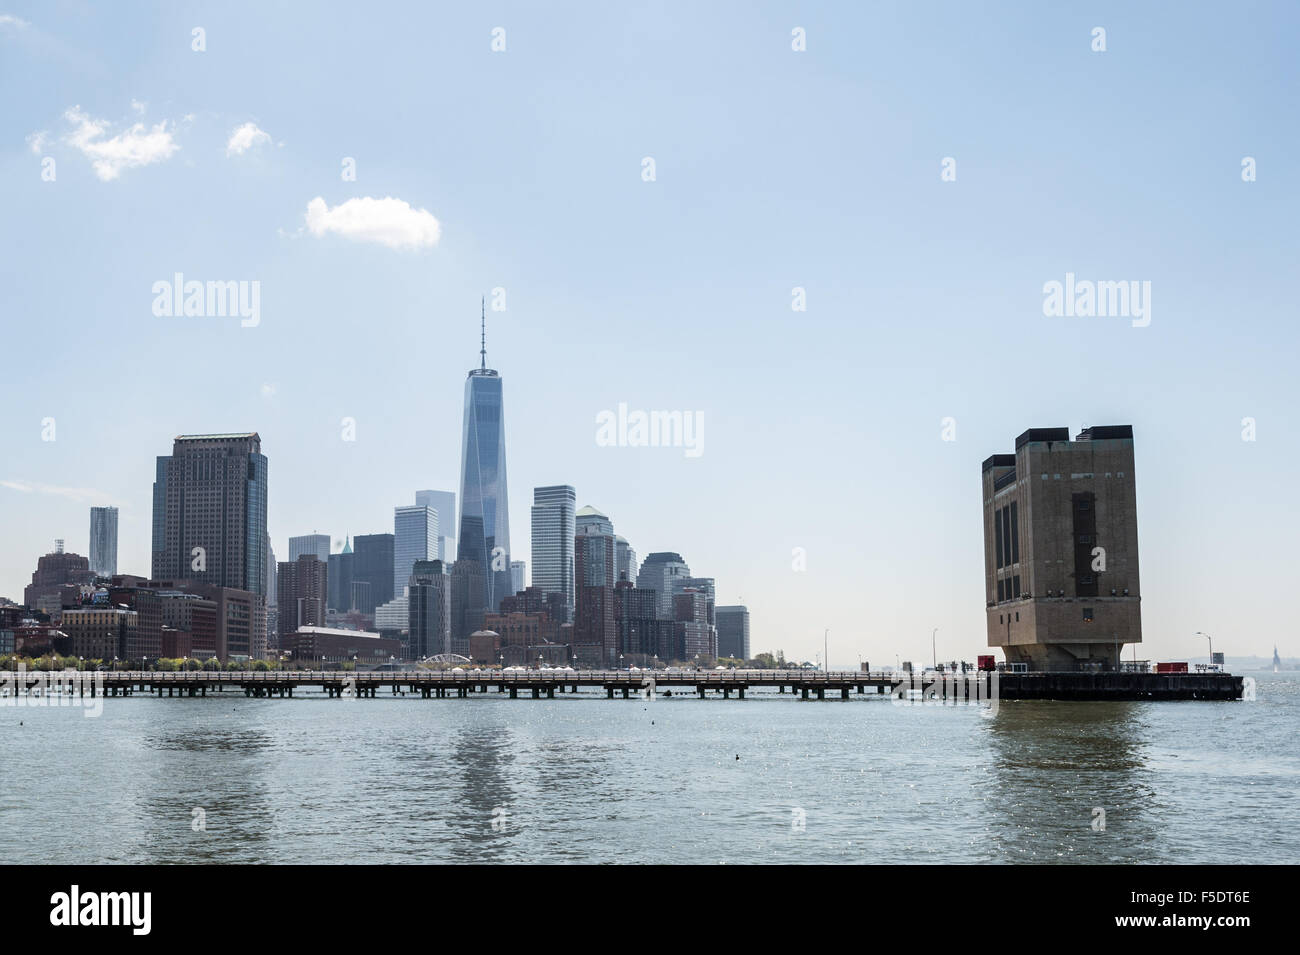 Holland Tunnel air ventilation tower with lower Manhattan in background. Stock Photo